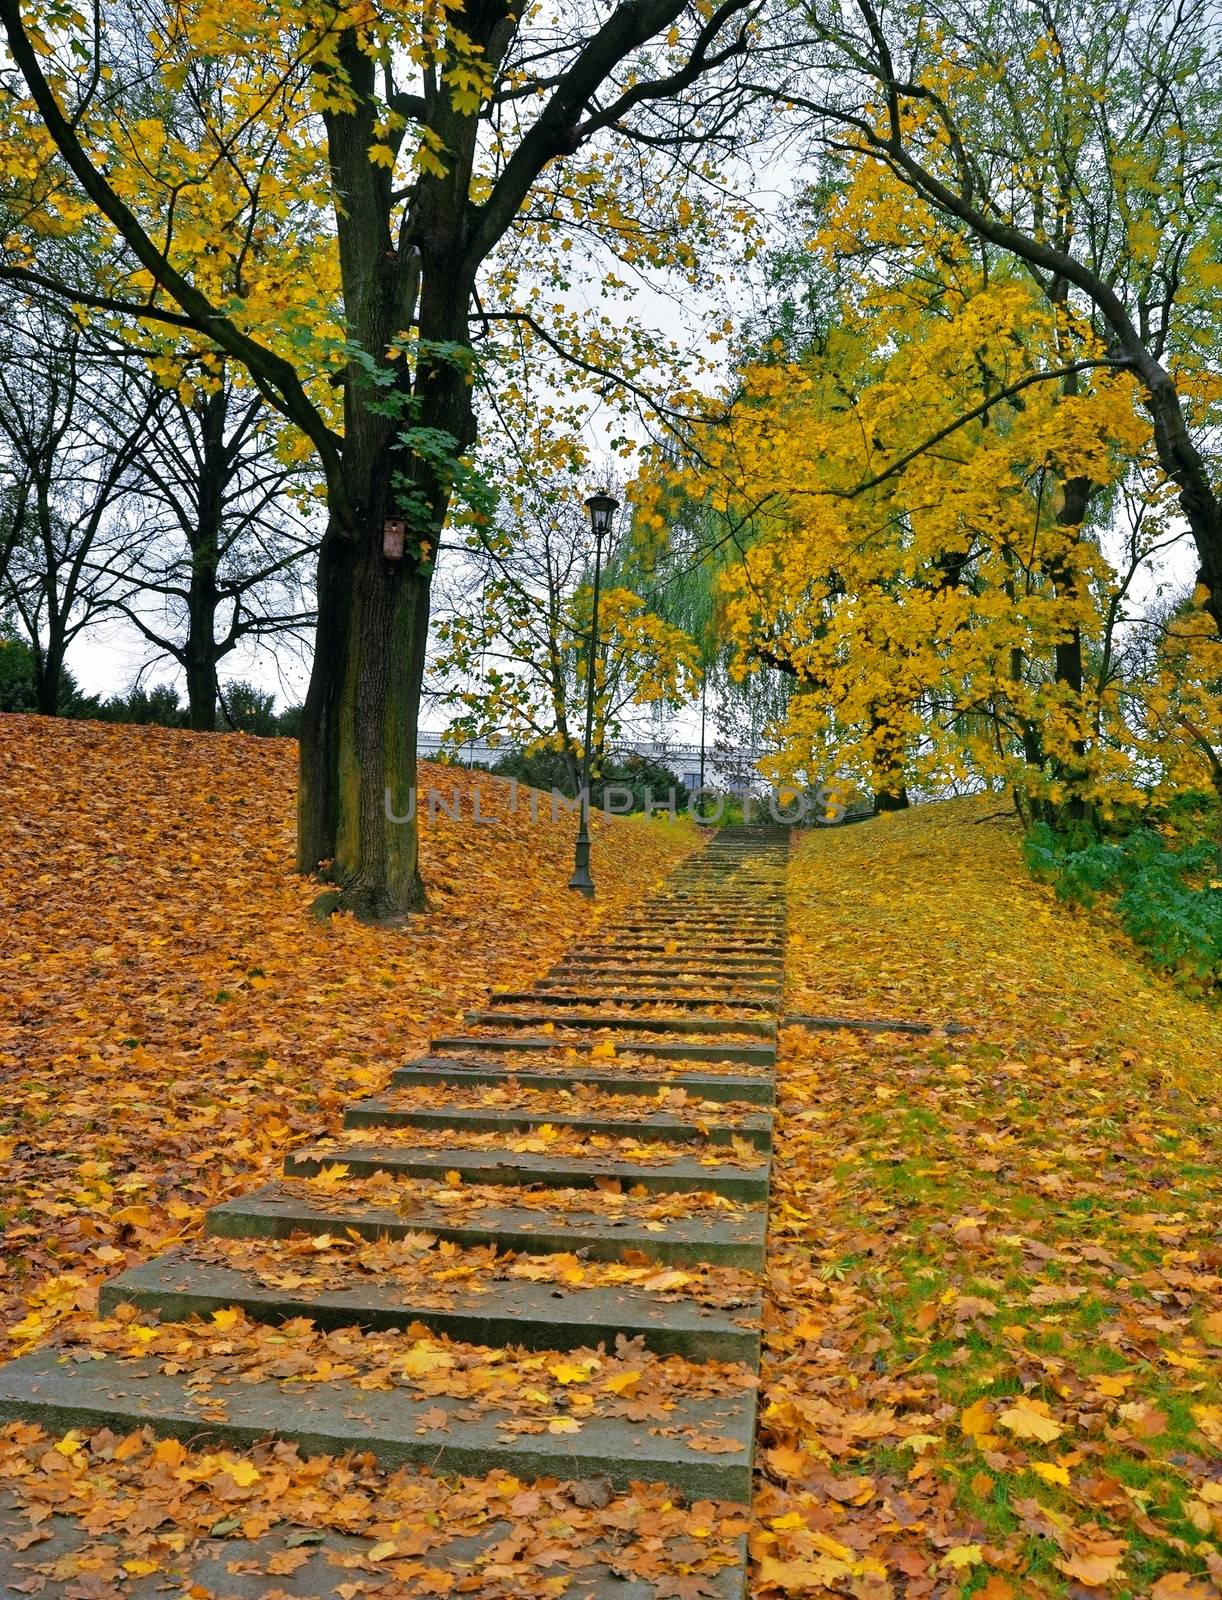 Park view with stairs in autumn